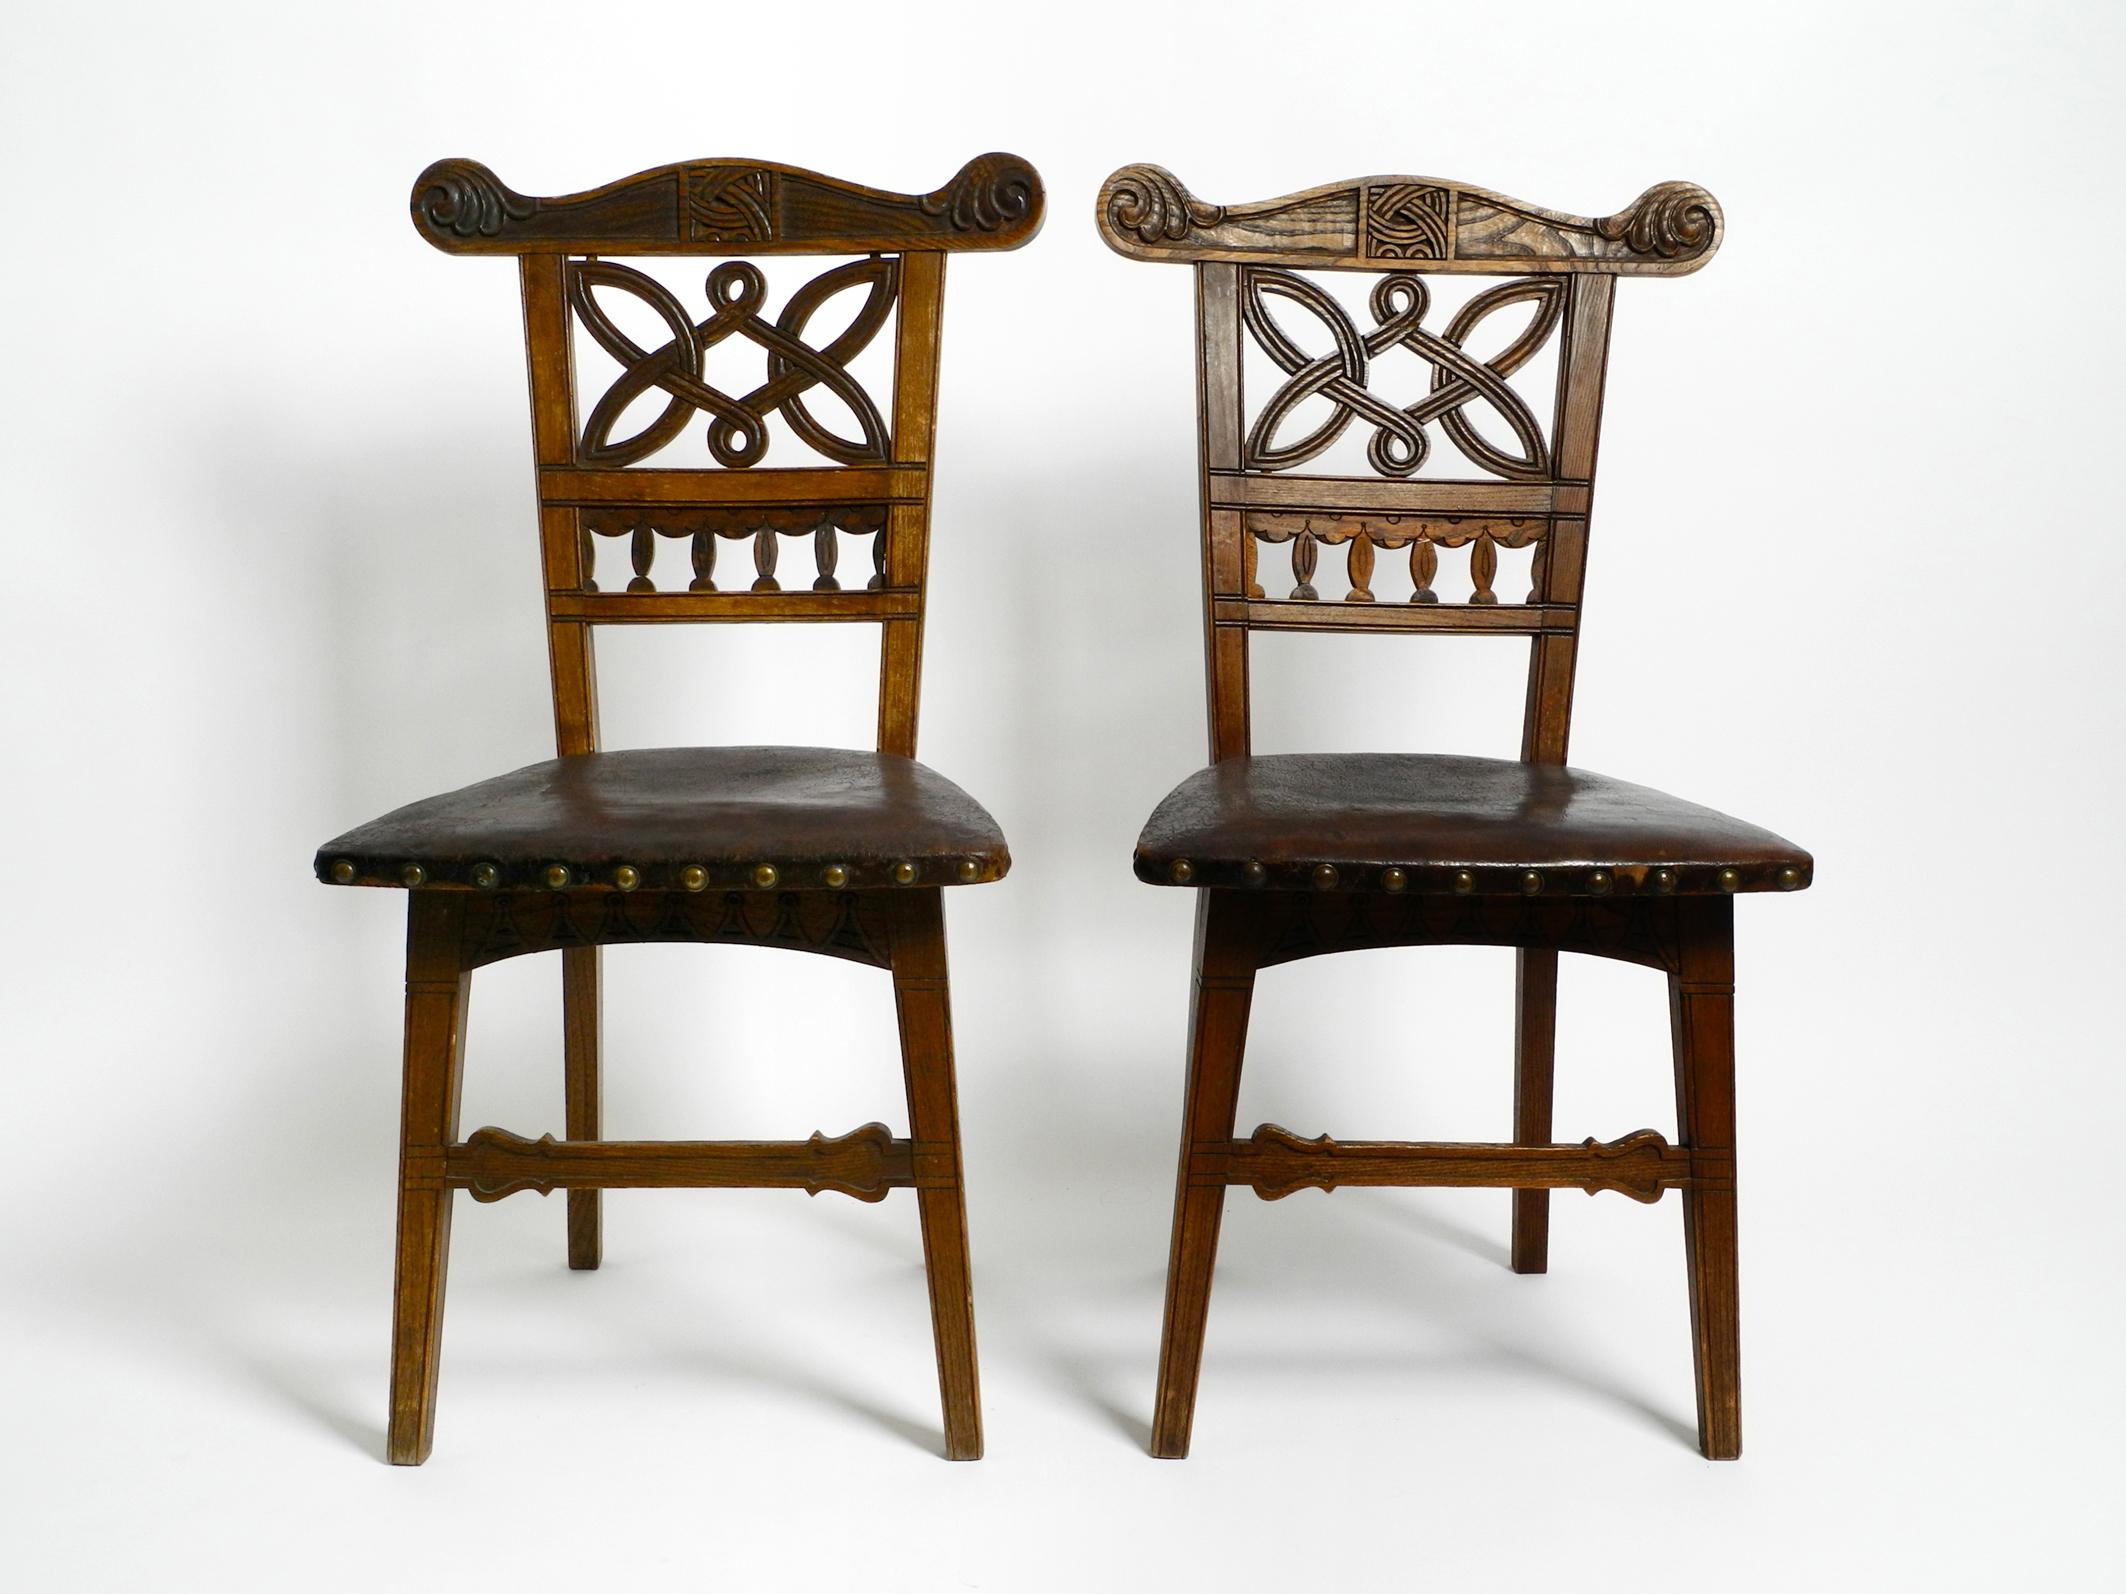 Two beautiful ornate Art Nouveau wooden chairs.
Probably made in France around 1900.
The original riveted leather seats are still on.
Great, very complex production with many beautiful details.
Chairs are also suitable as free-standing pieces of